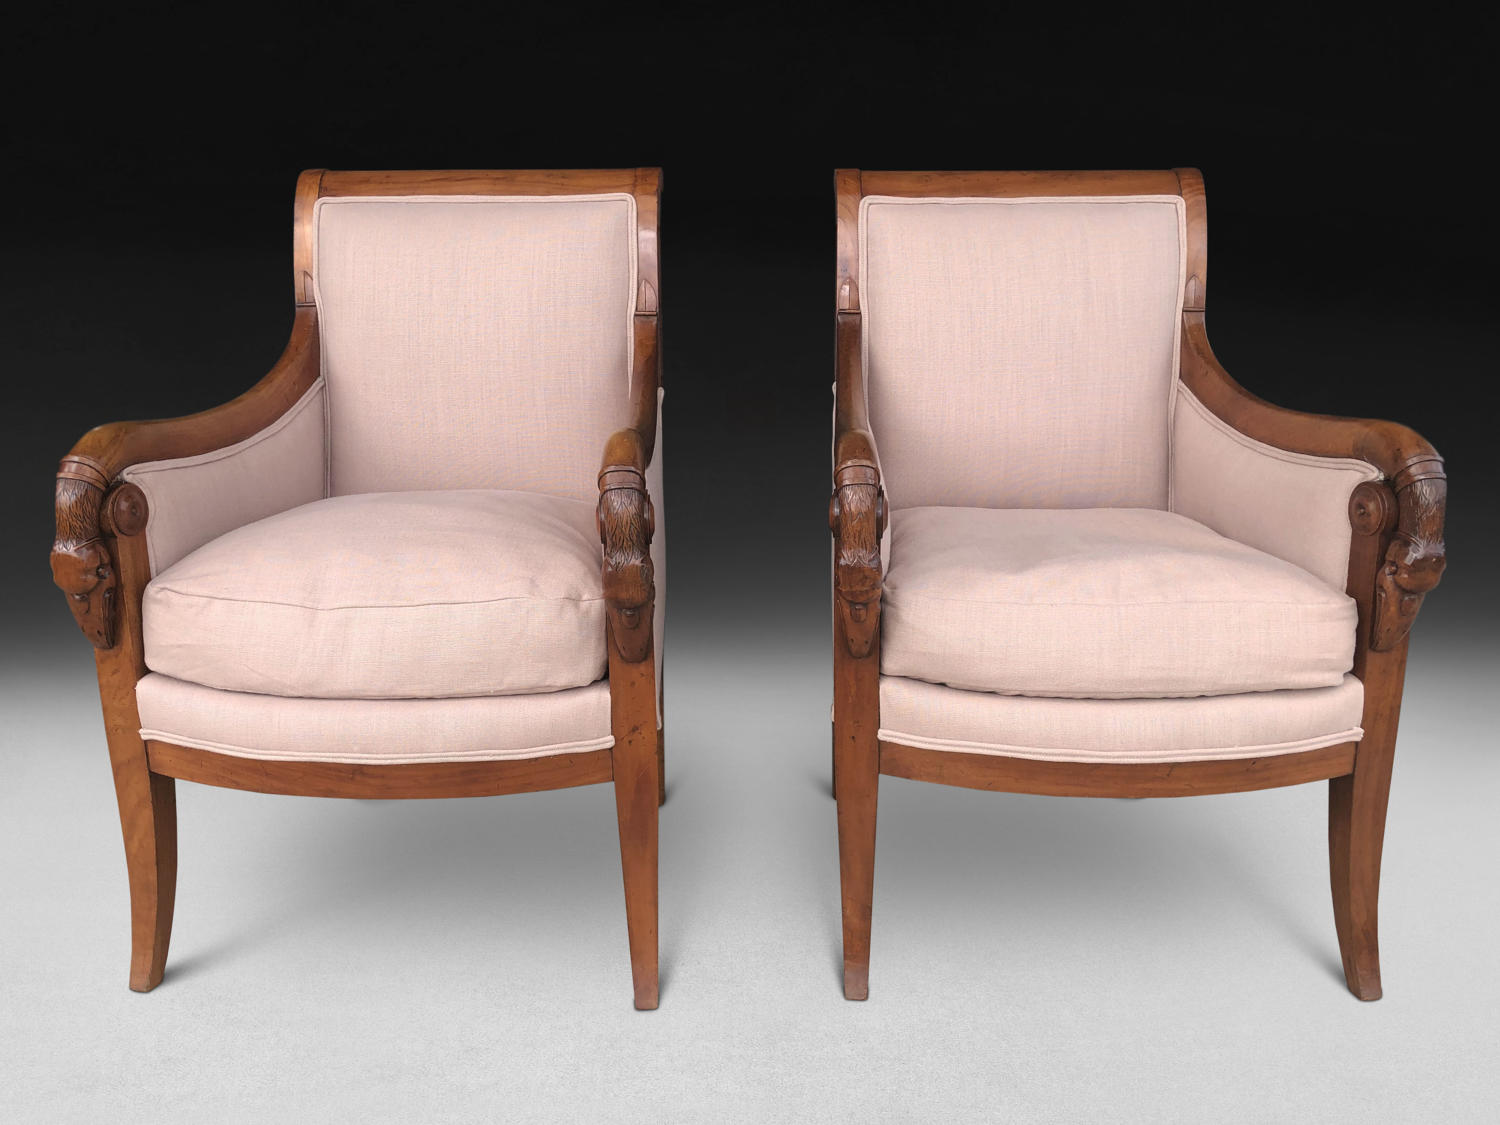 A PAIR OF EARLY 19TH CENTURY BERGERE ARMCHAIRS